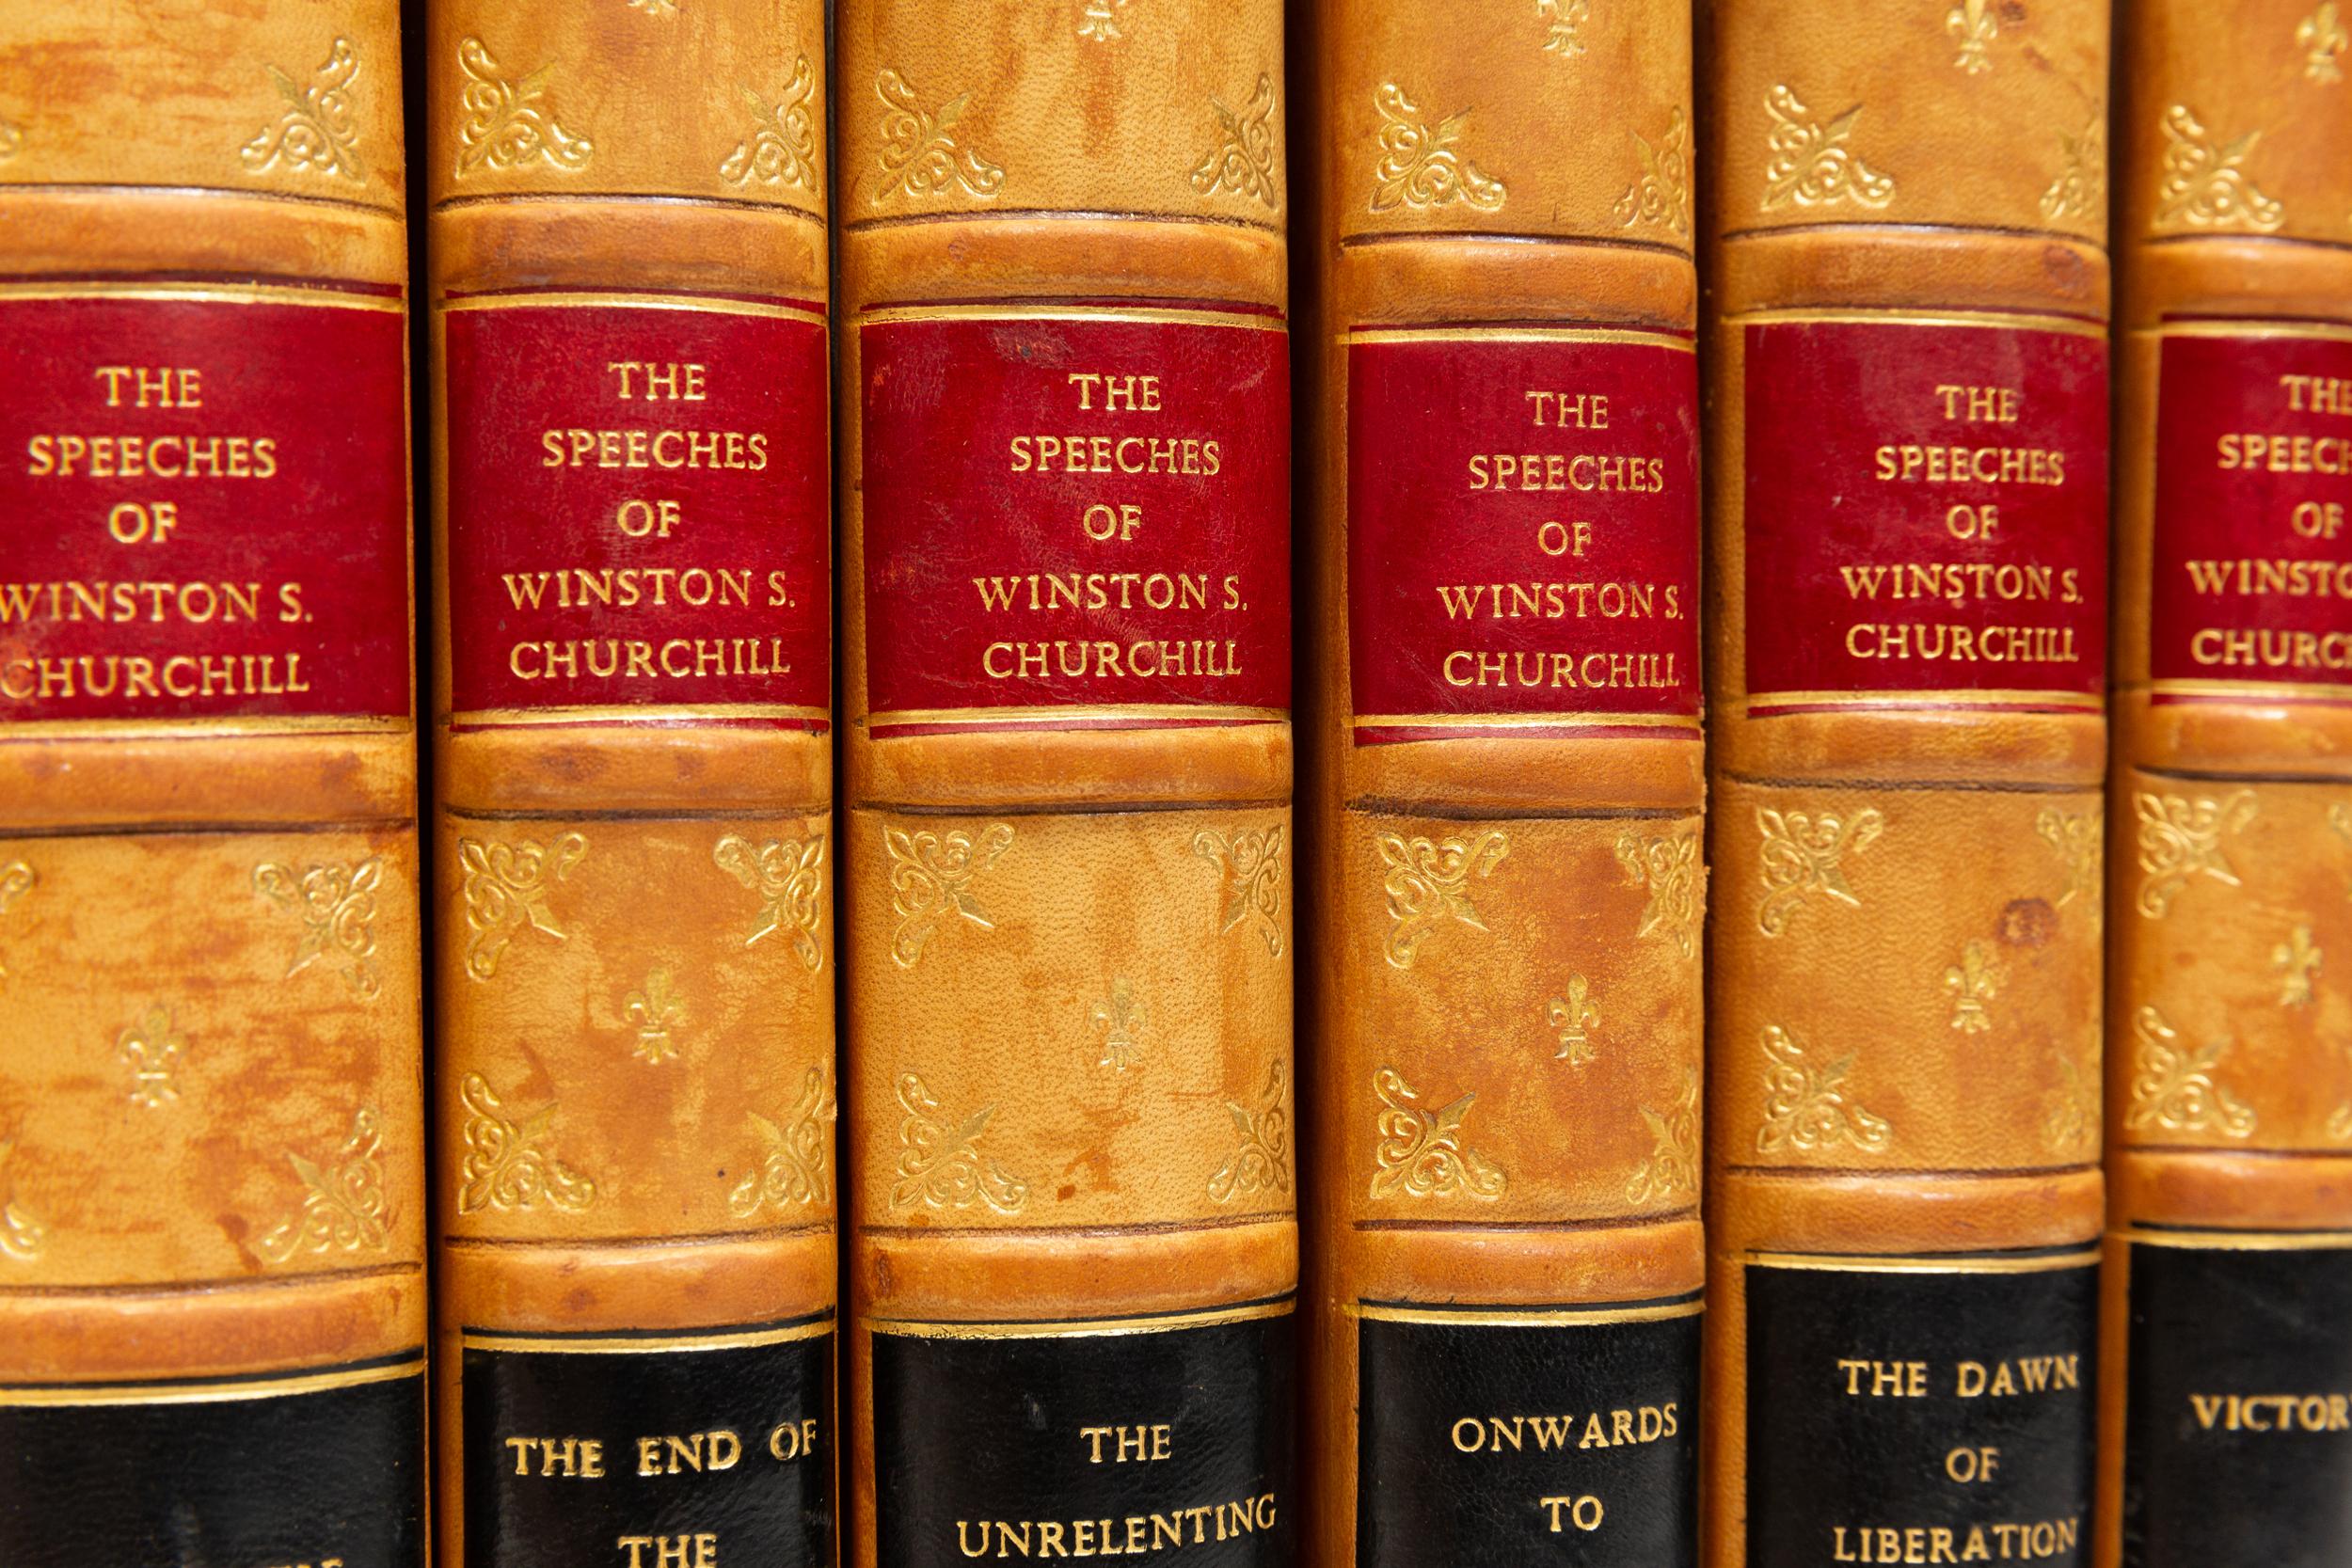 7 Volumes. Sir Winston S. Churchill. The War Speeches.Compiled by Randolph S. Churchill. With half-tone frontispiece. Rebound in full tan calf, raised bands,
gilt panels, red and blue labels. Published: London: Cassell & Co. 1941-46
First Editions.